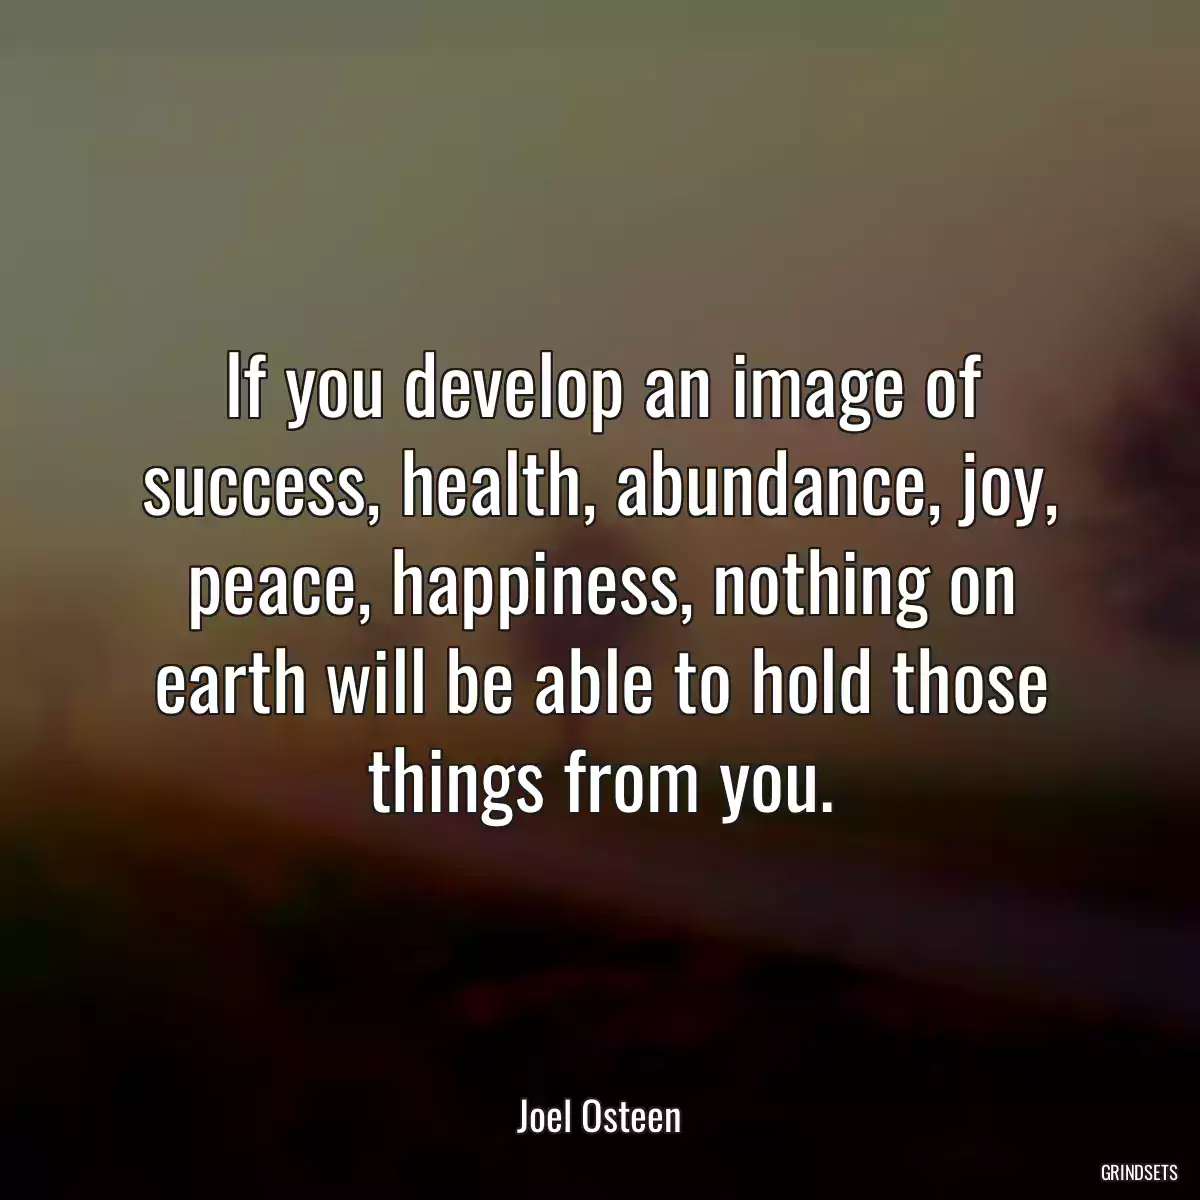 If you develop an image of success, health, abundance, joy, peace, happiness, nothing on earth will be able to hold those things from you.